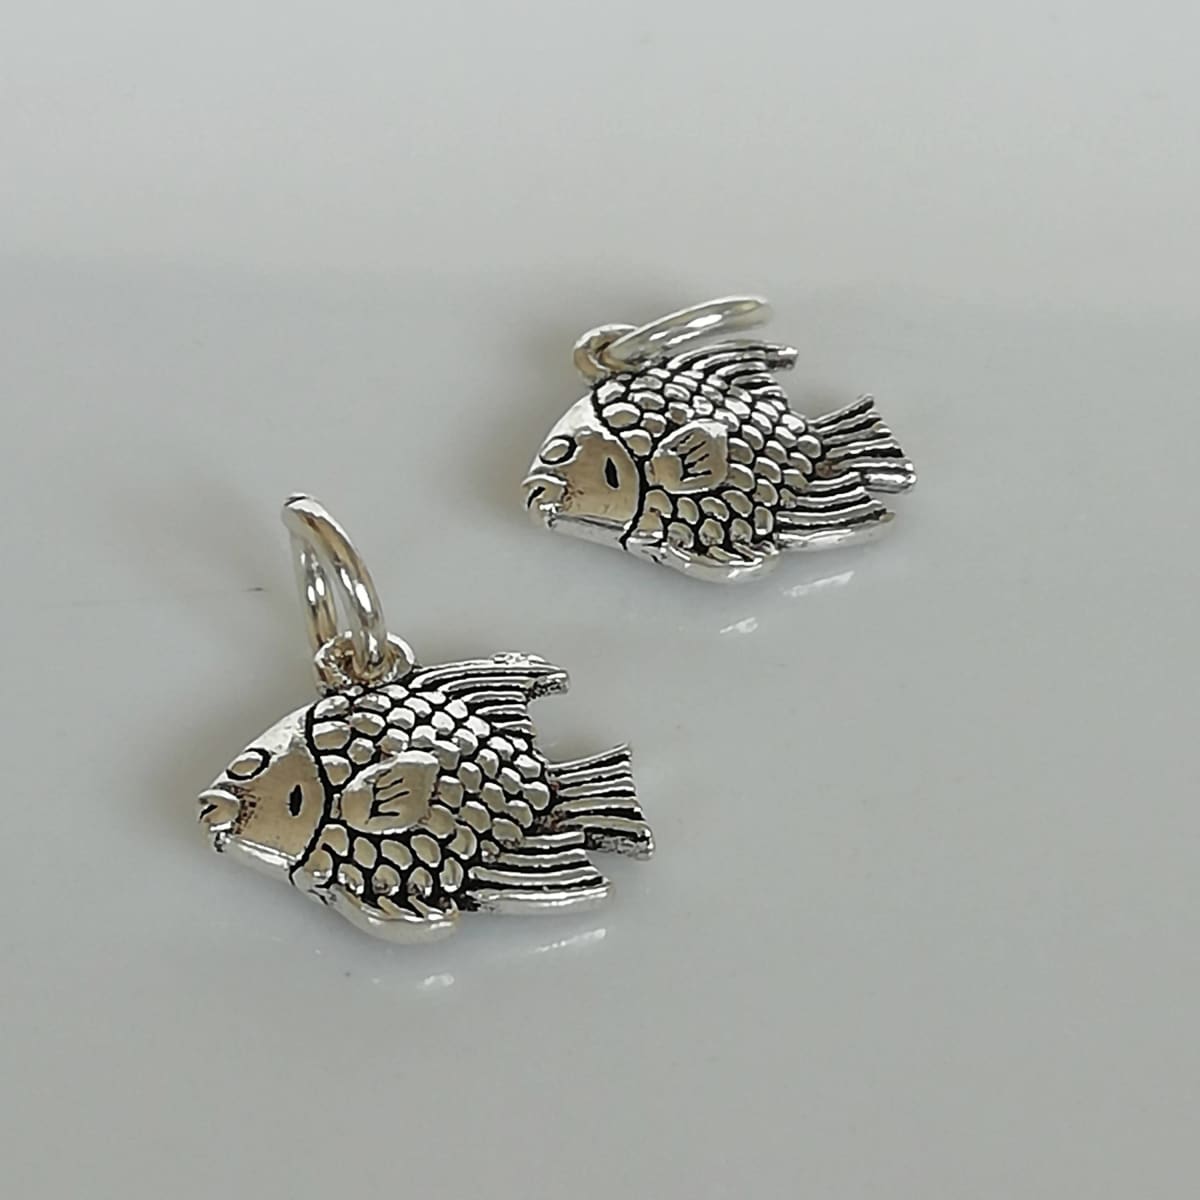 Cute Fish Shaped Sterling Silver Bracelets Handmade Jewelry Gifts Acce –  igemstonejewelry